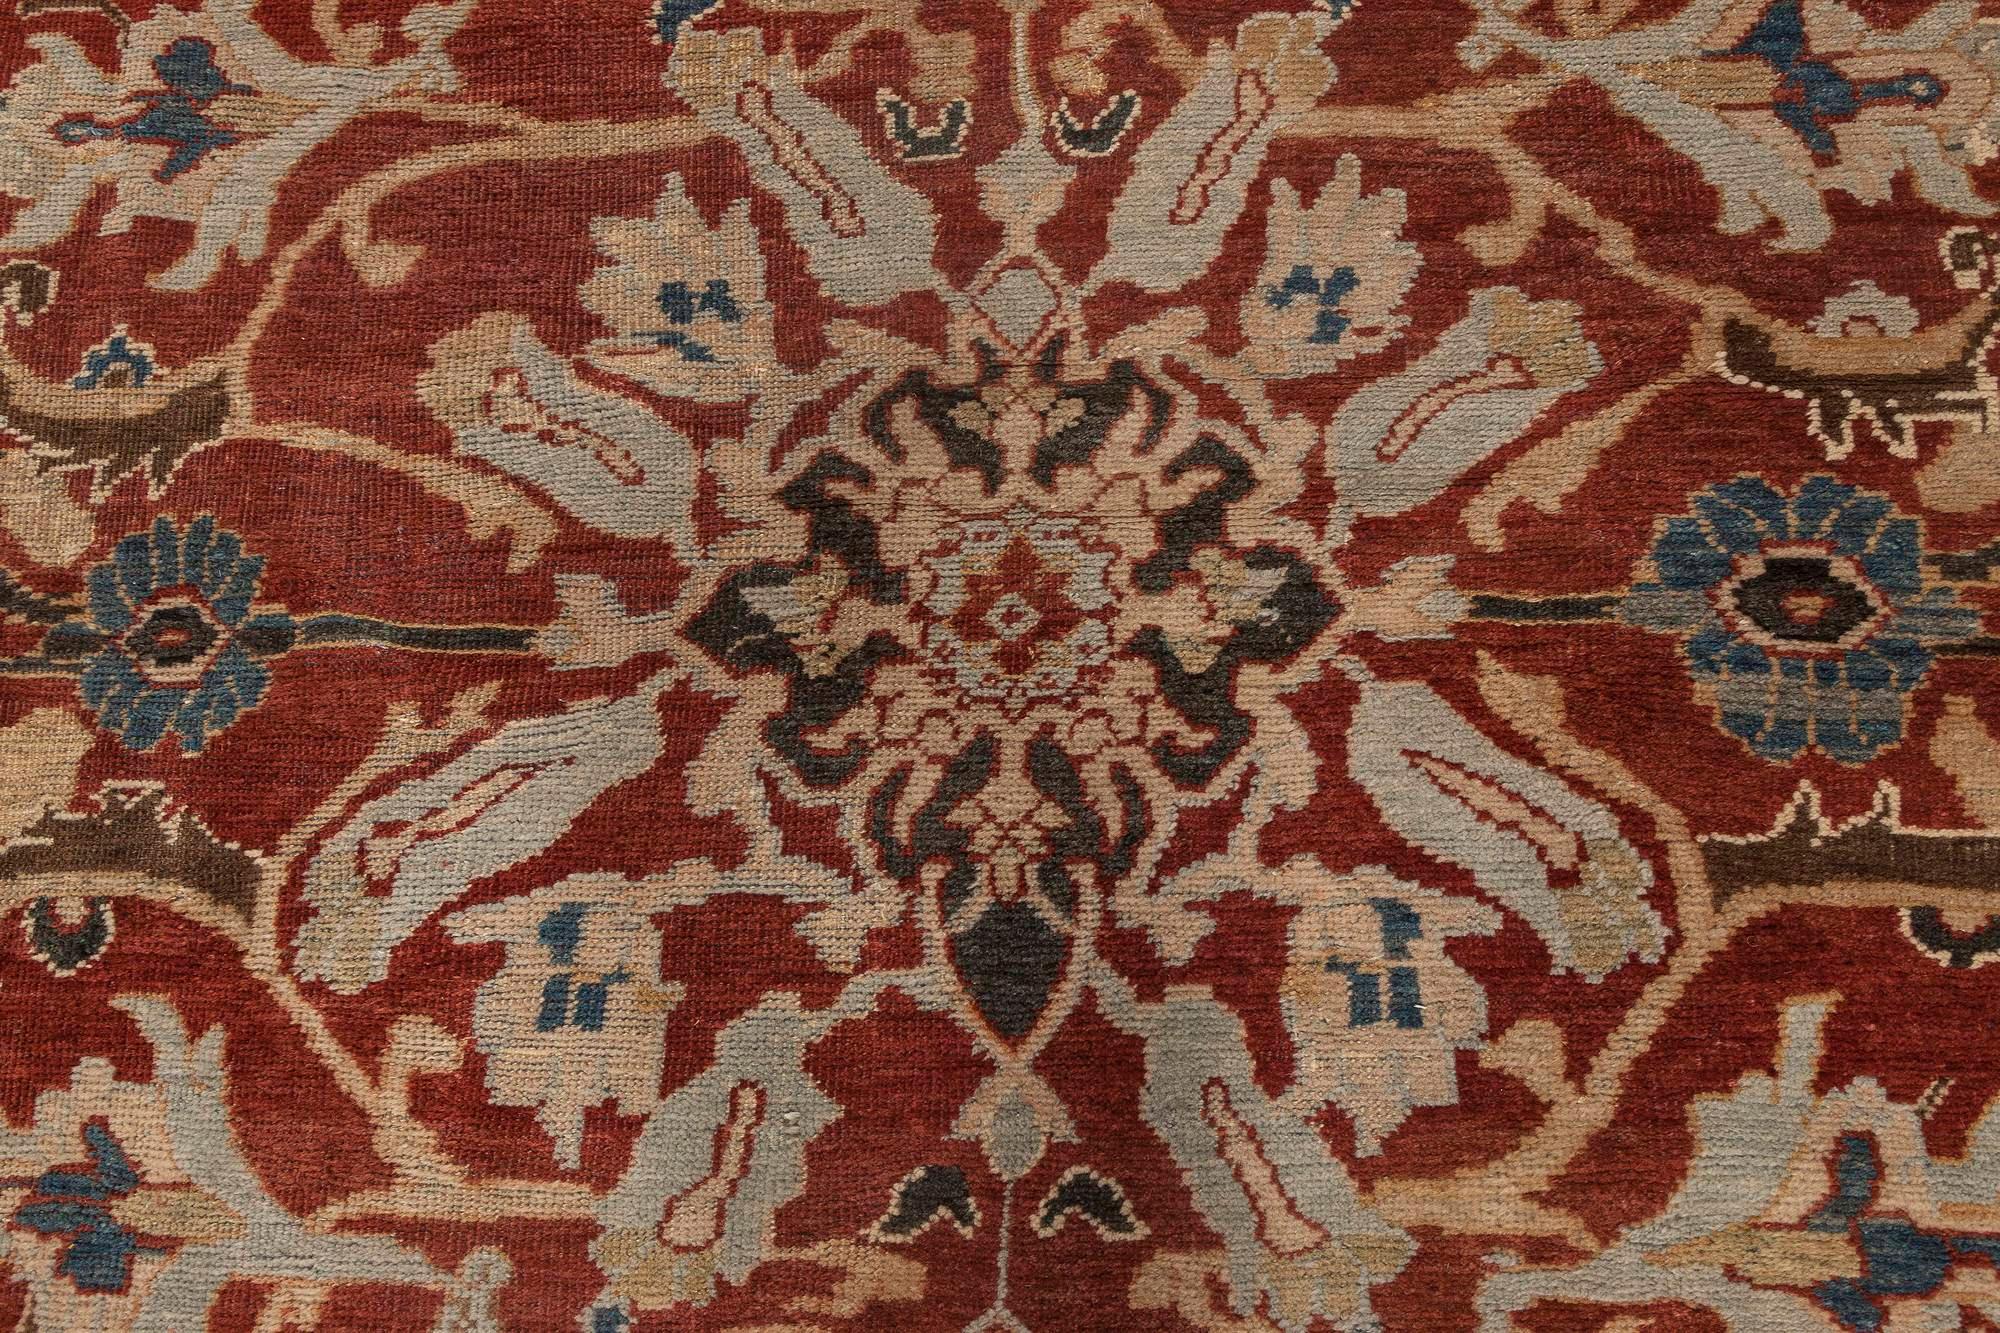 Antique Persian Sultanabad Red Hand Knotted Wool Rug
Size: 13'3